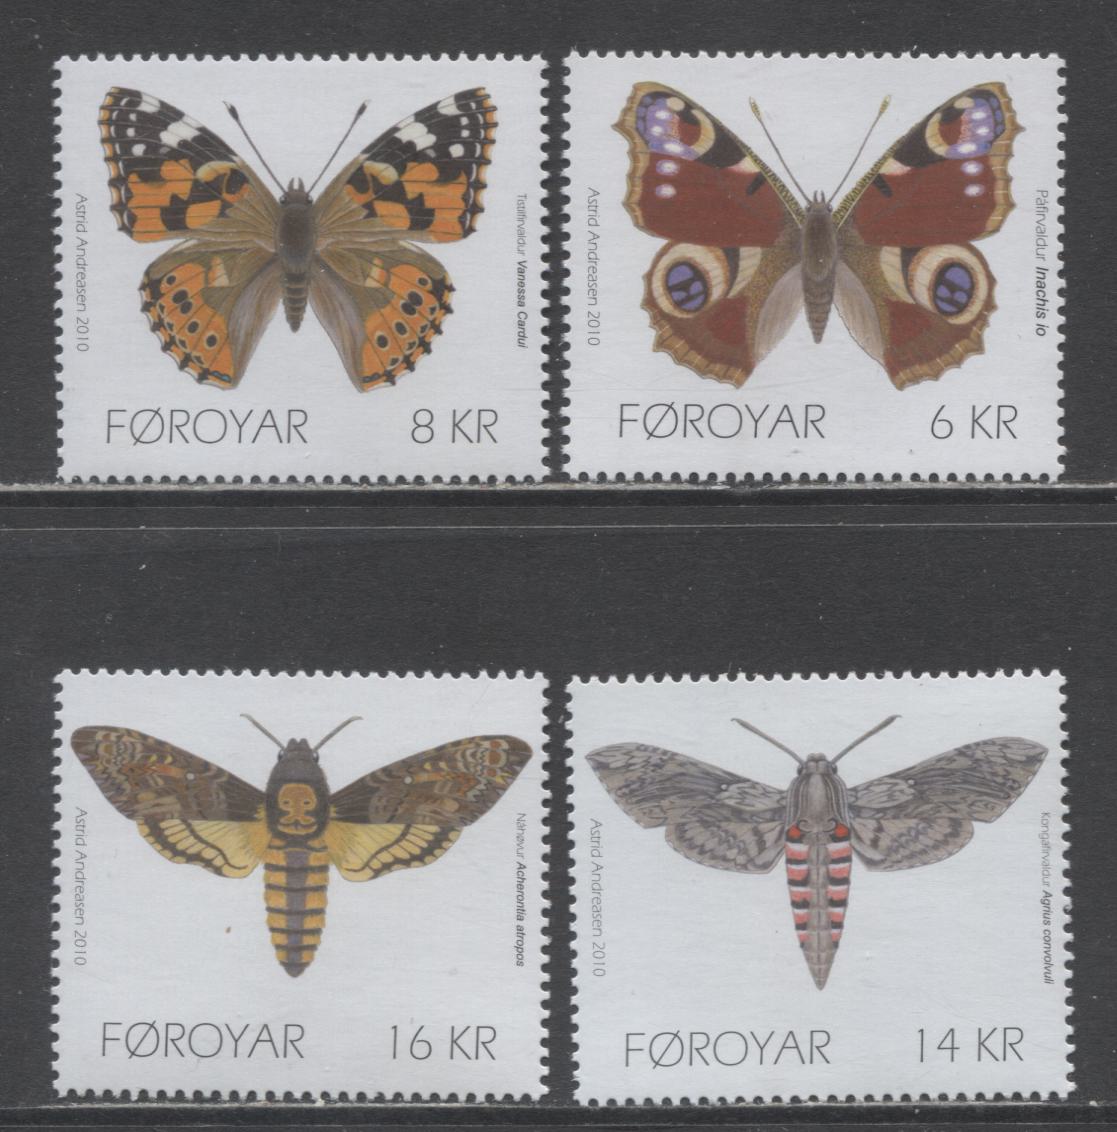 Lot 179 Faroe Islands SC#529-532 2010 Butterfly & Moth Issue, 4 VFNH Singles, Click on Listing to See ALL Pictures, 2017 Scott Cat. $16.5